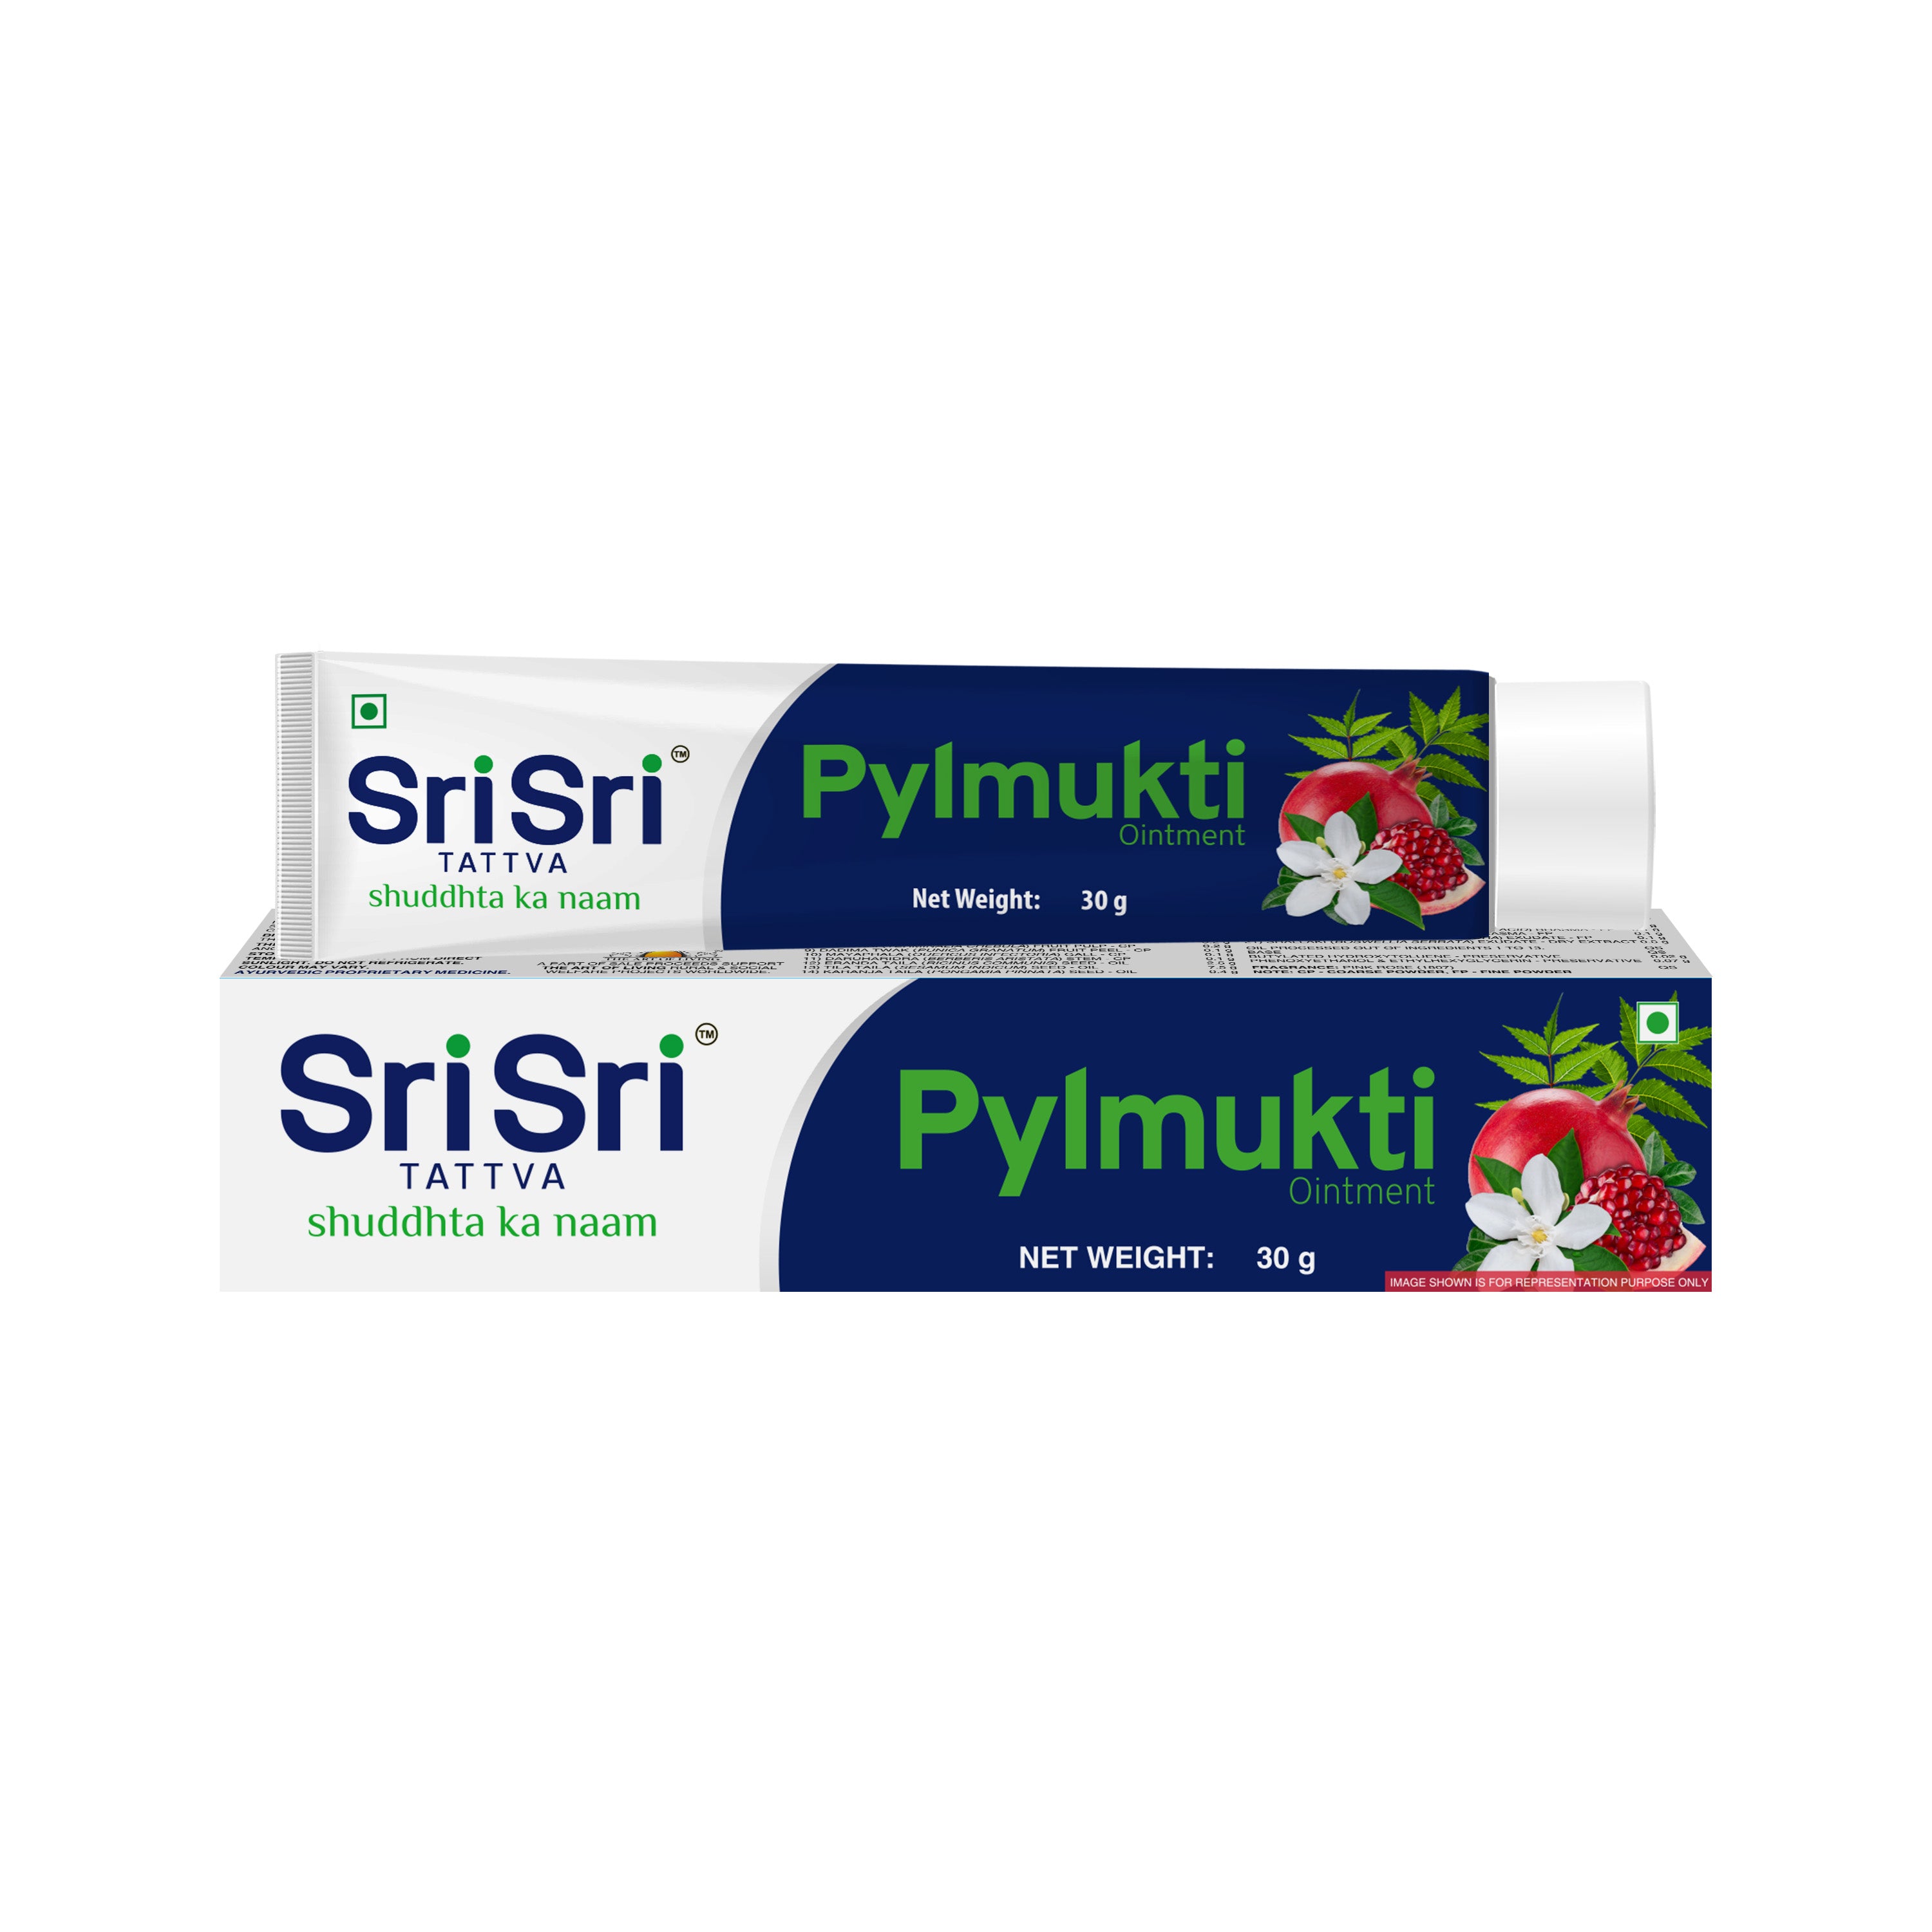 Pylmukti Ointment | To Overcome The Associated Pain, Sores, Itching & Bleeding In Piles & Fissures | 30 g